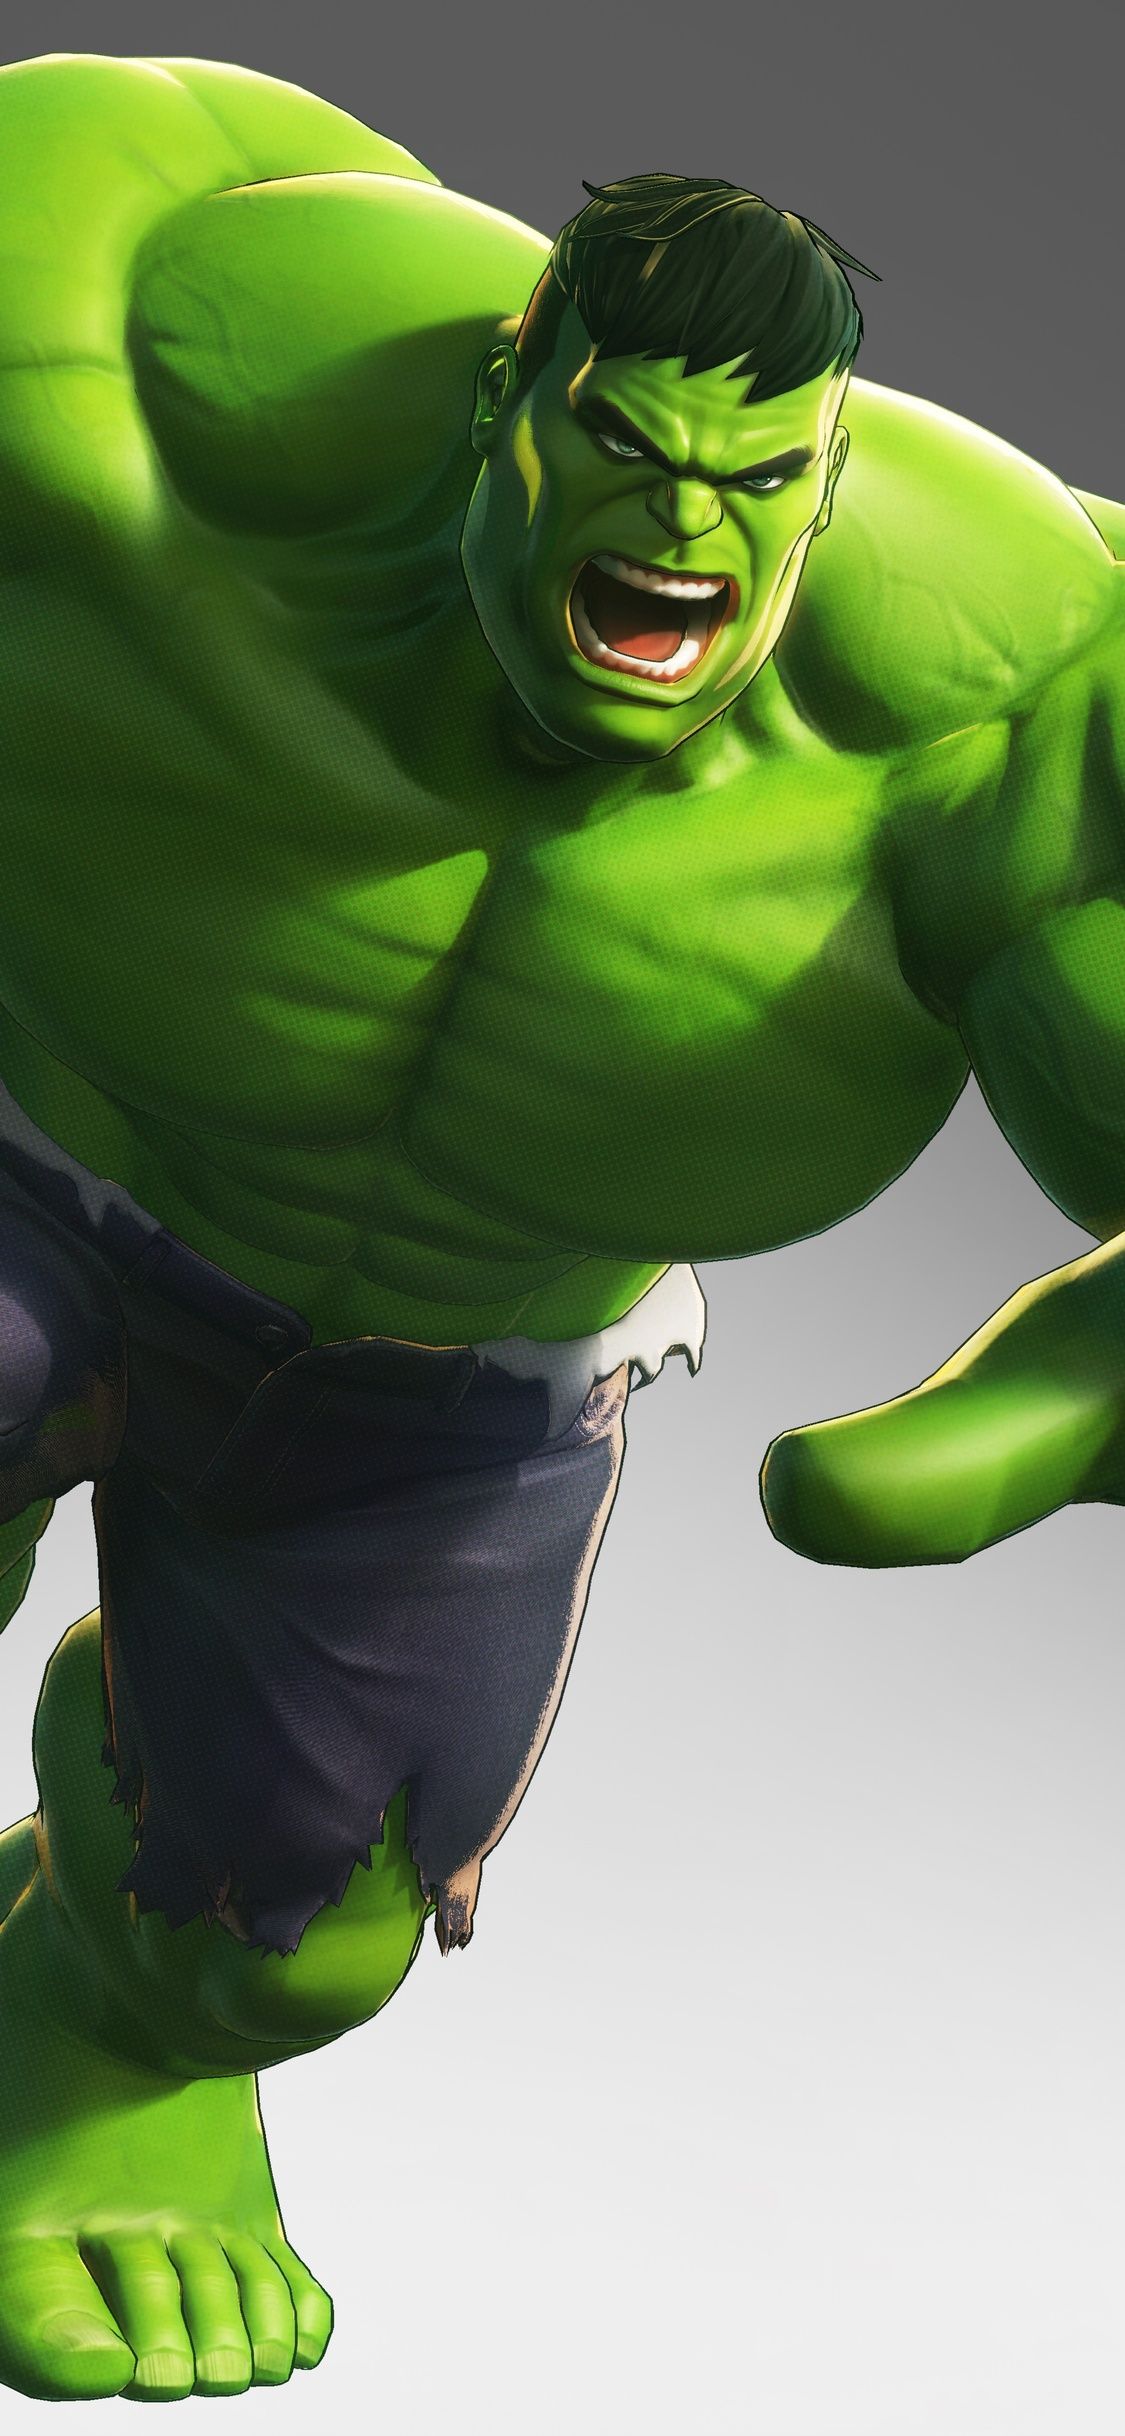 Marvel Ultimate Alliance 3 2019 Hulk iPhone XS, iPhone iPhone X HD 4k Wallpaper, Image, Background, Photo and Picture